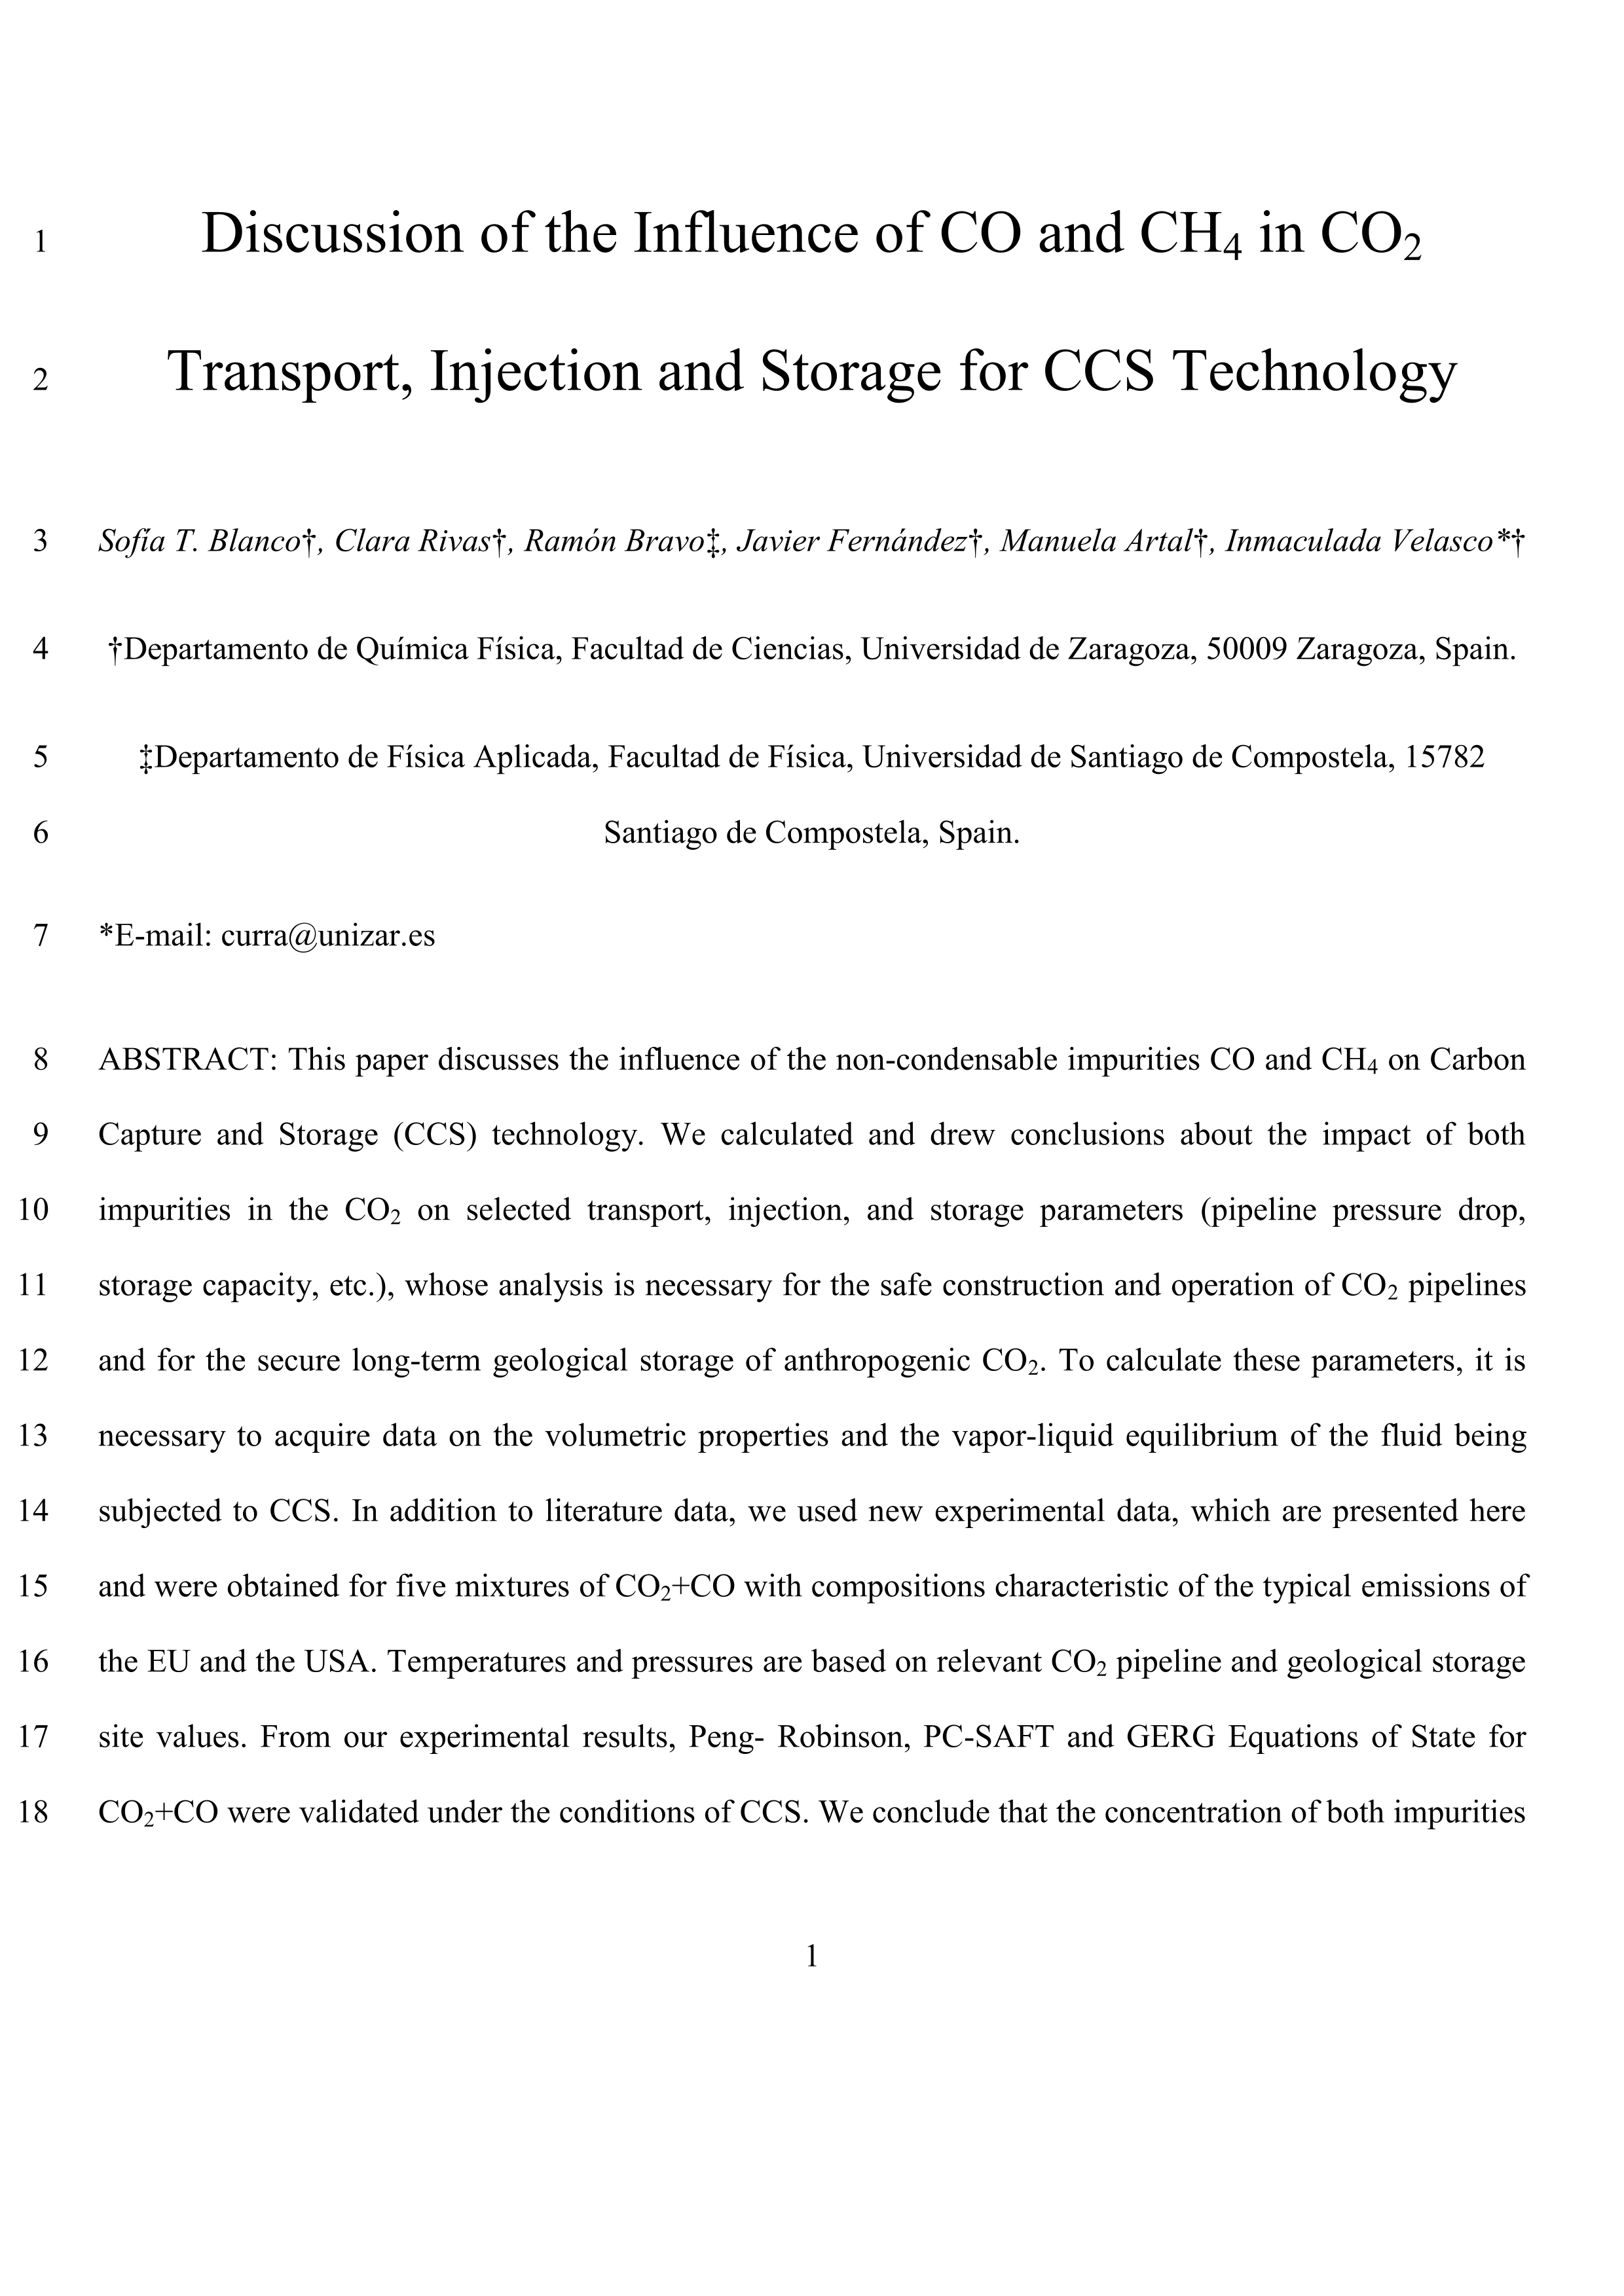 Discussion of the Influence of CO and CH4 in CO2 Transport, Injection, and Storage for CCS Technology